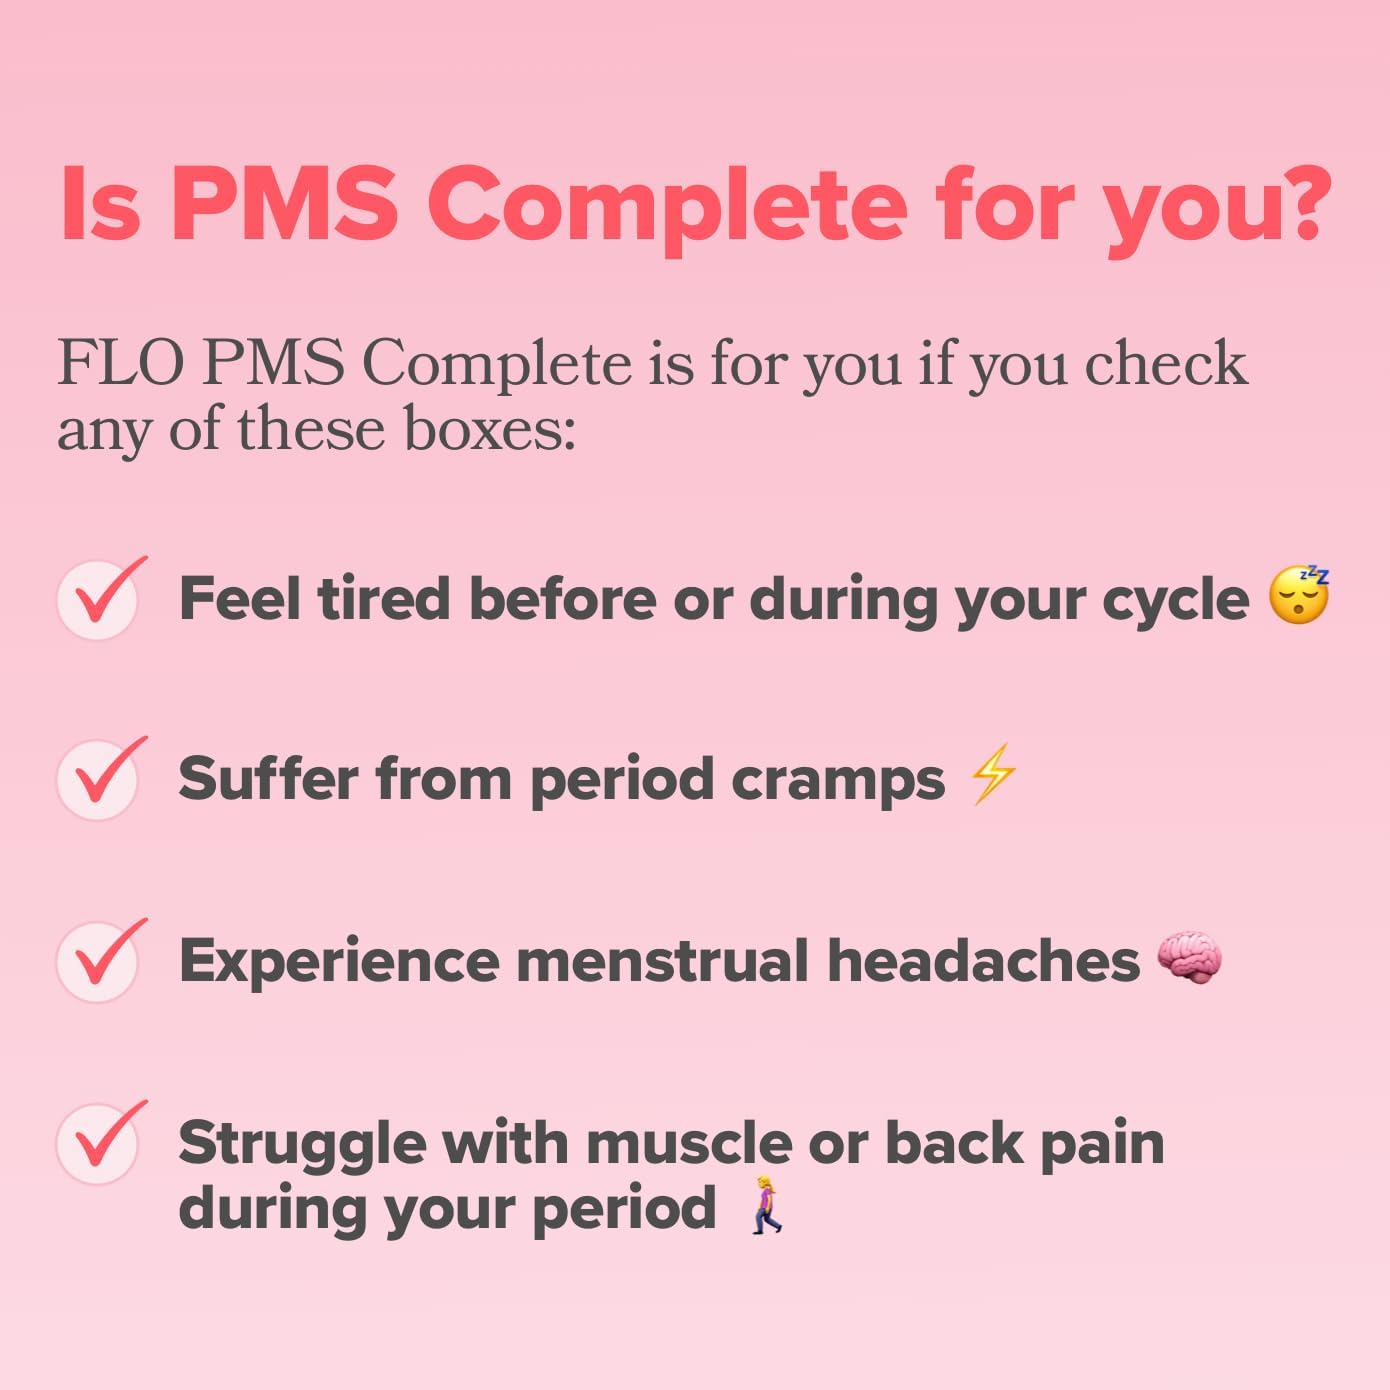 FLO PMS Complete Tablets, Menstrual Pain Relief for Women, 24 Count (1 Pack) - Multi-Symptom Pain Reliever with Acetaminophen, Caffeine, & Pyrilamine Maleate for Cramps, Headaches, Backaches, Bloating : Health & Household